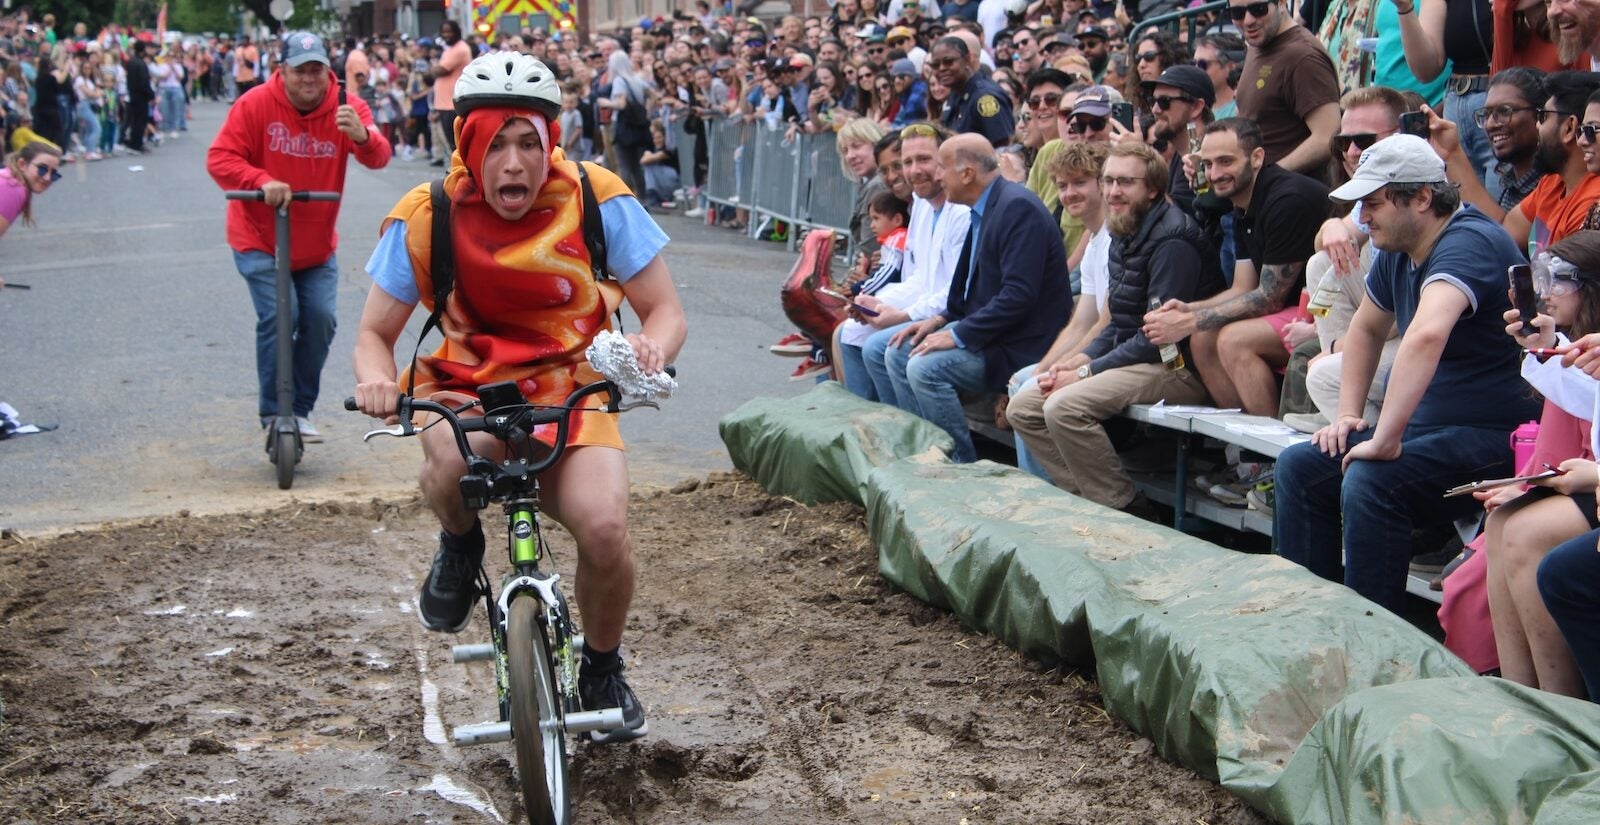 A person dressed as a hotdog rides through the mud pit at the Kensington Derby